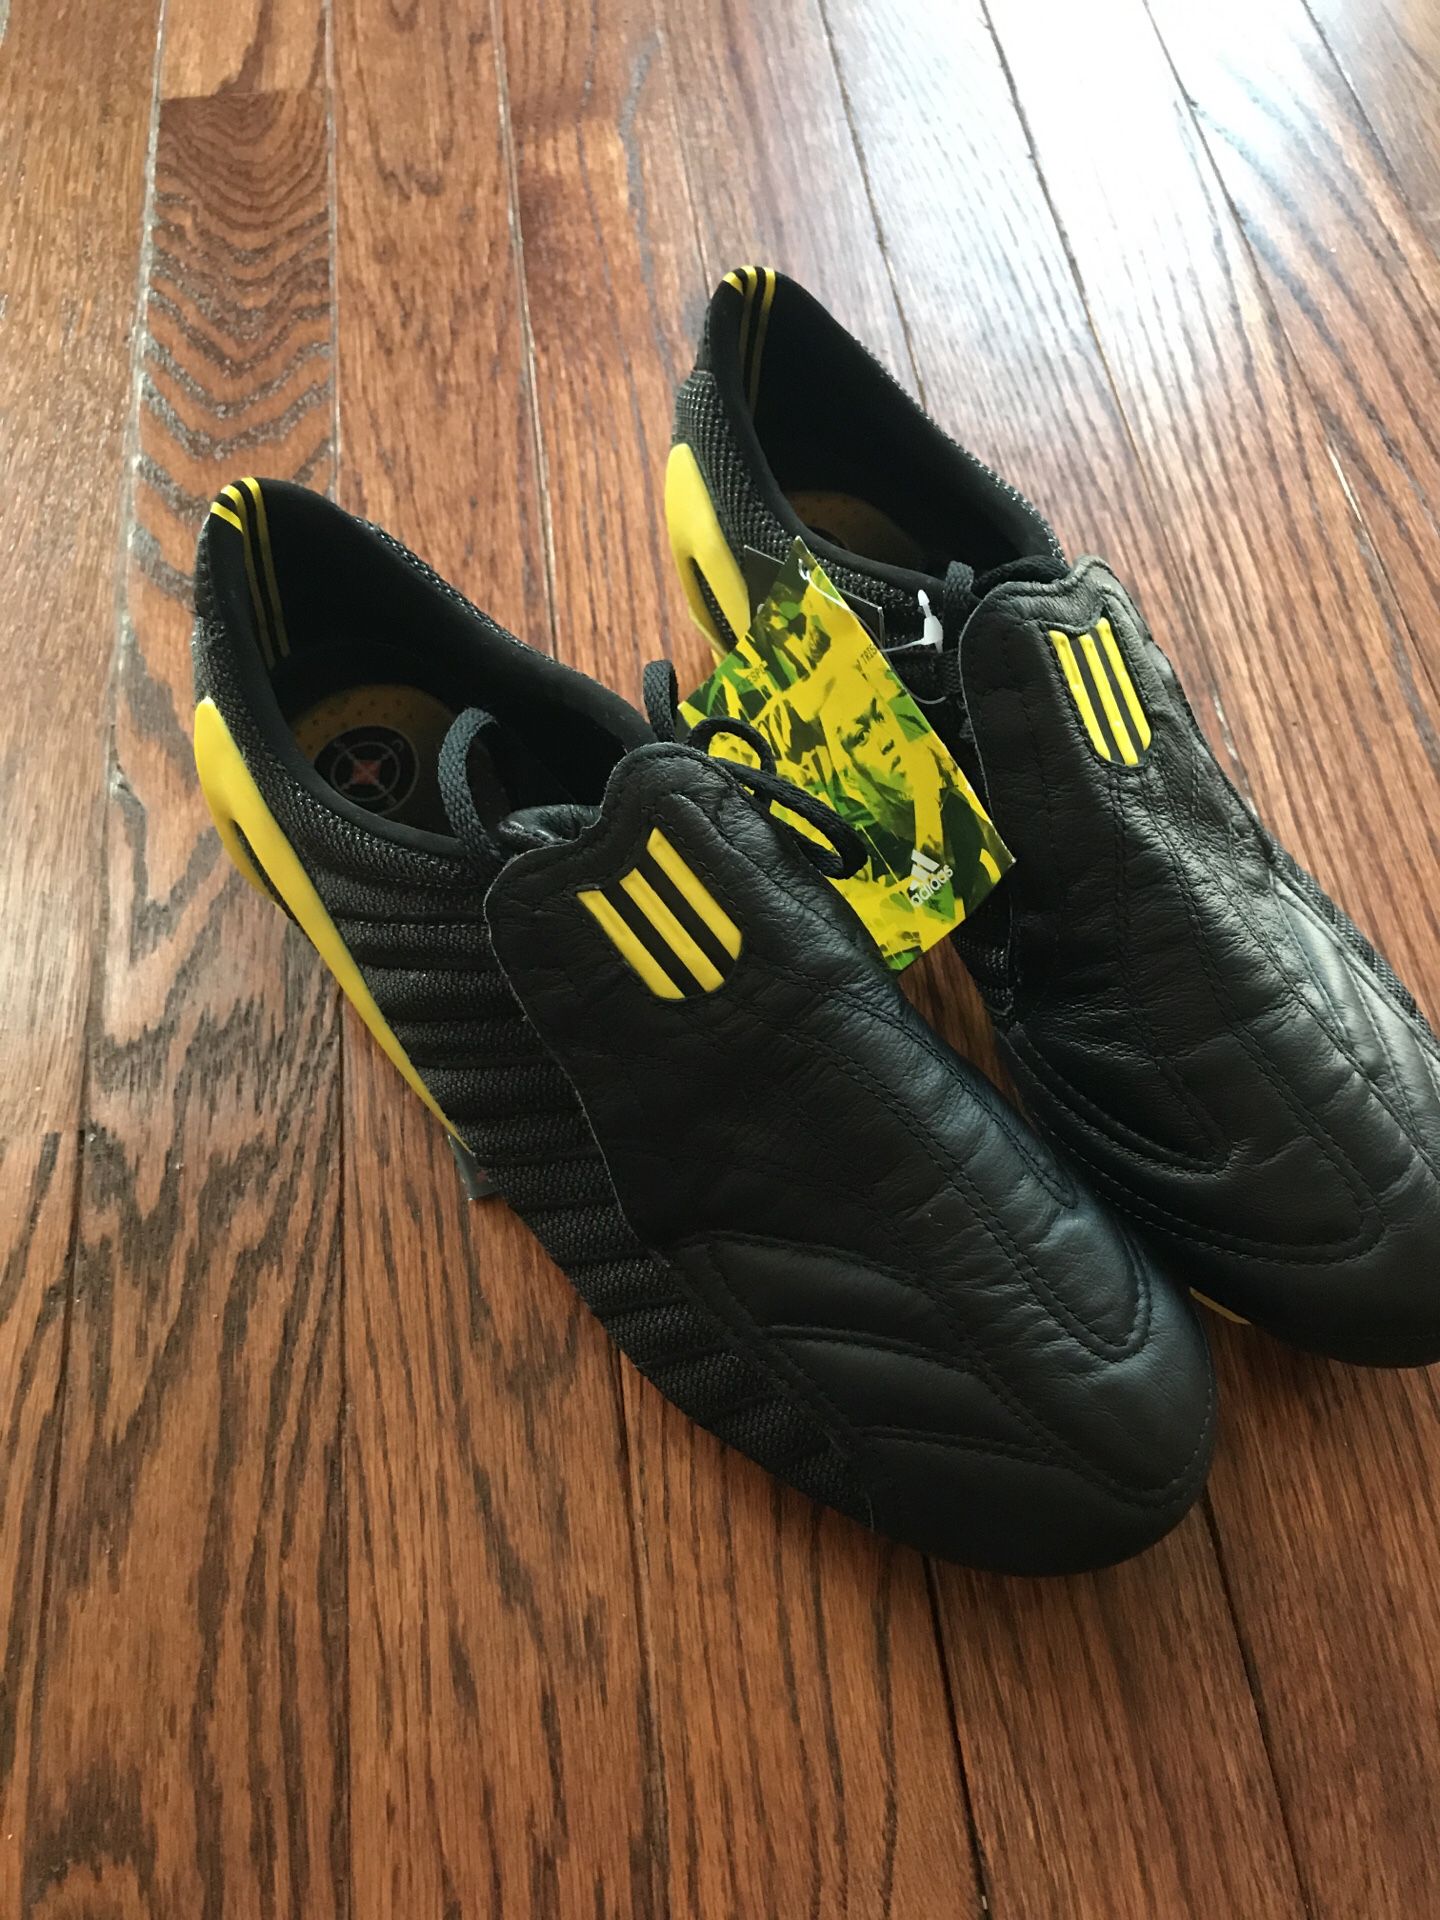 Adidas F50 TRX FG Leather RARE Limited Edition for Sale in Lockport, IL OfferUp